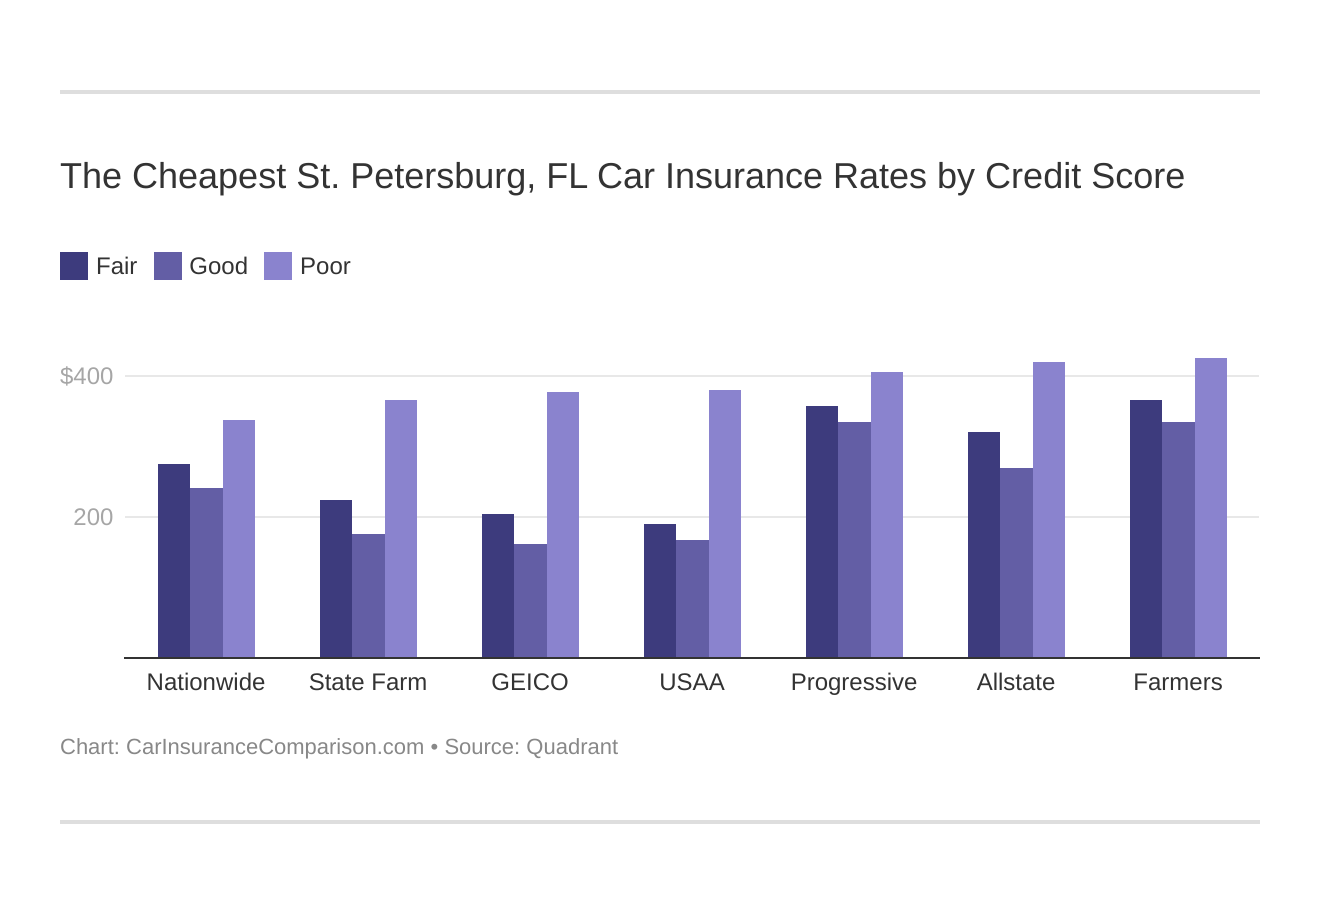 The Cheapest St. Petersburg, FL Car Insurance Rates by Credit Score